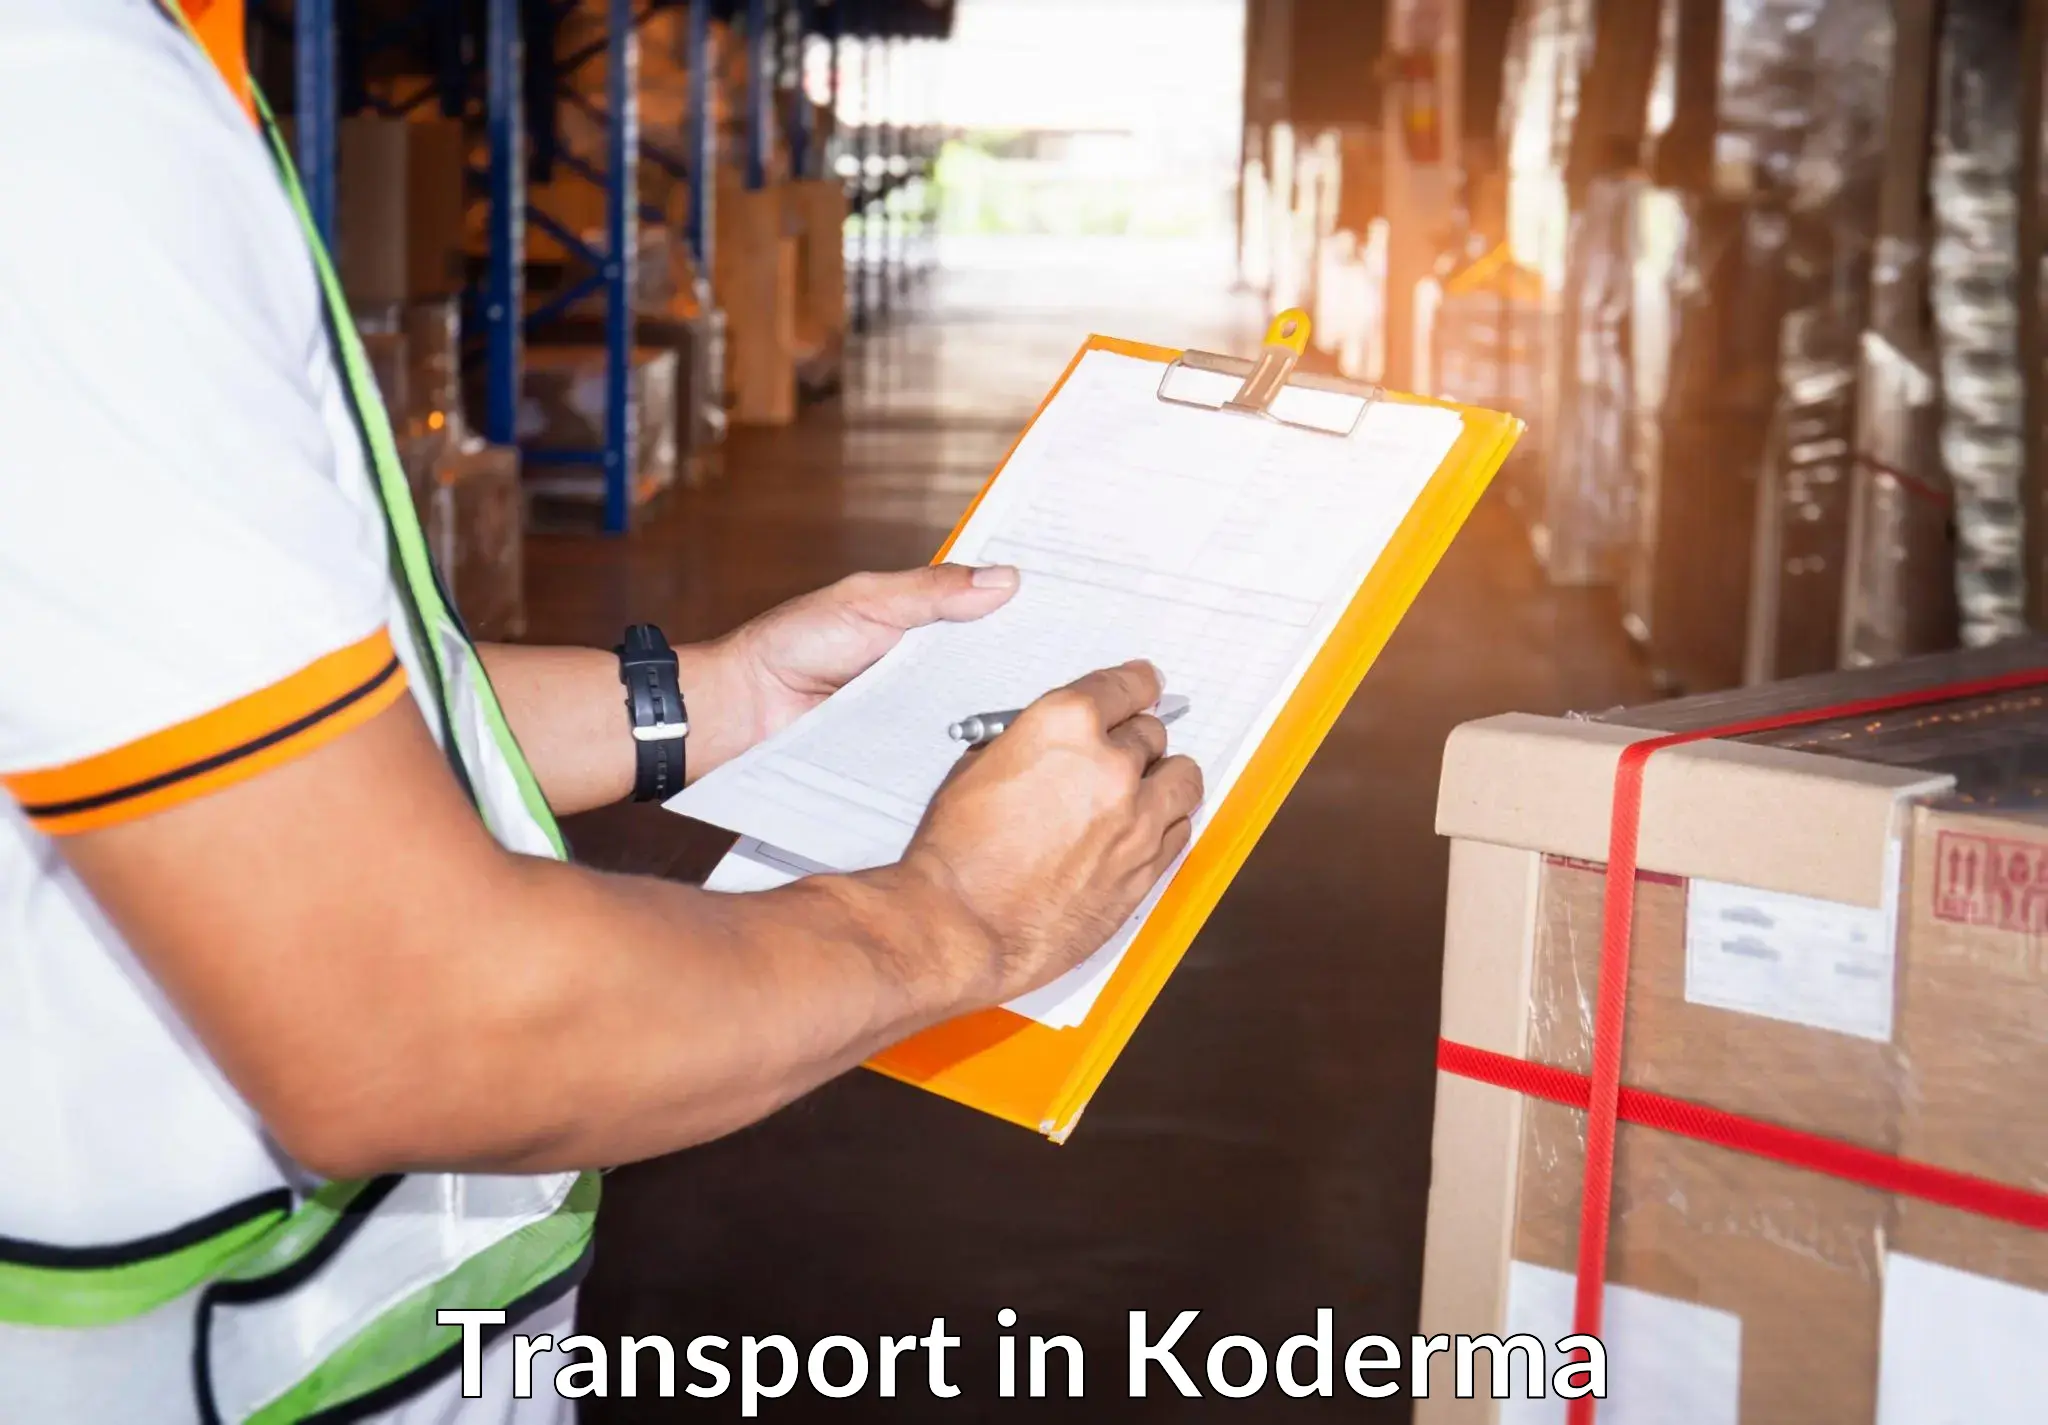 Express transport services in Koderma